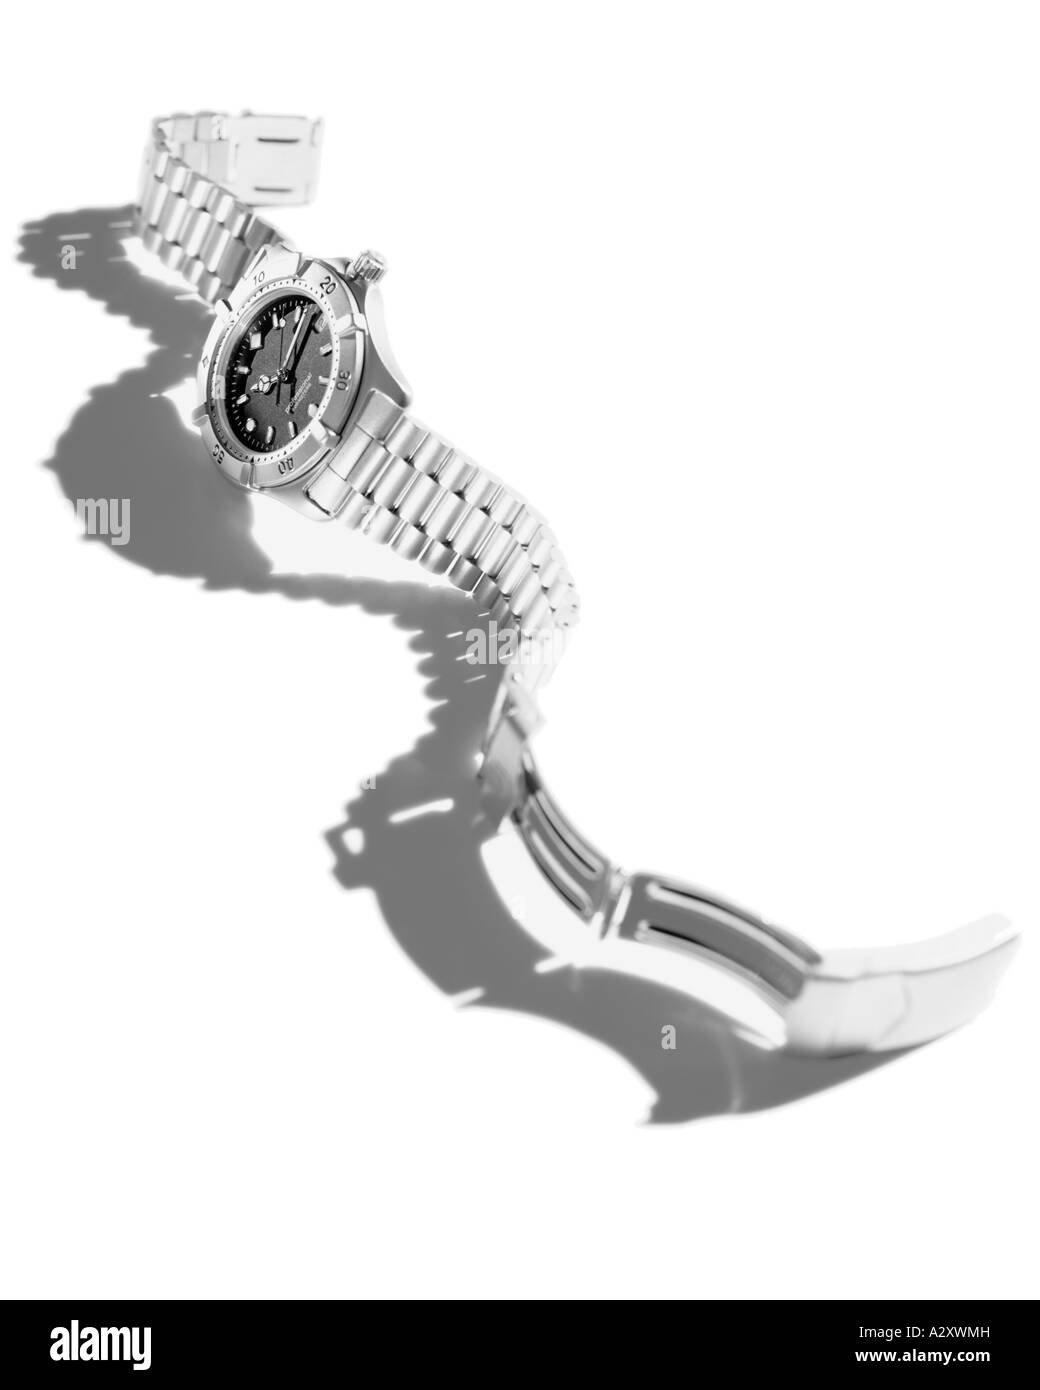 Stainless still silver watch laying on surface with band unclasped Stock Photo